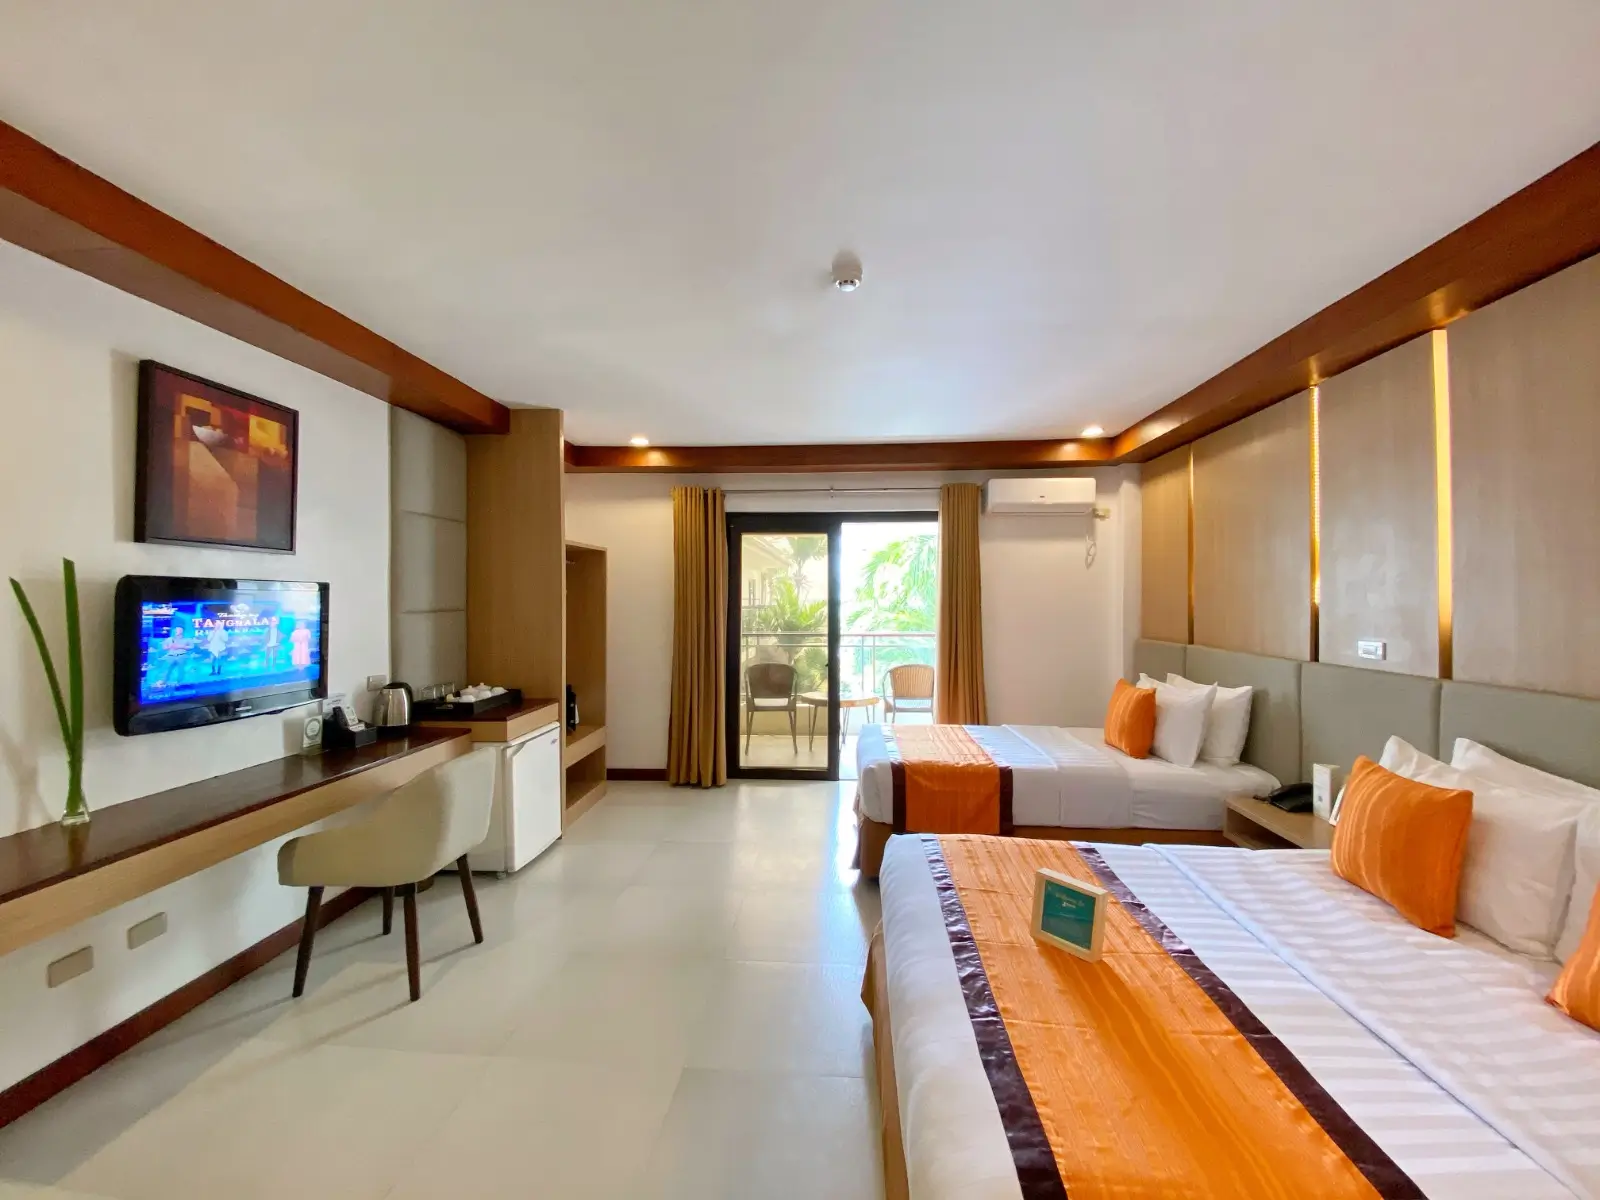 pacious guest room in Jony's Beach Resort featuring two large beds with crisp white and orange linens, a sleek wooden television console, and a view of the balcony.